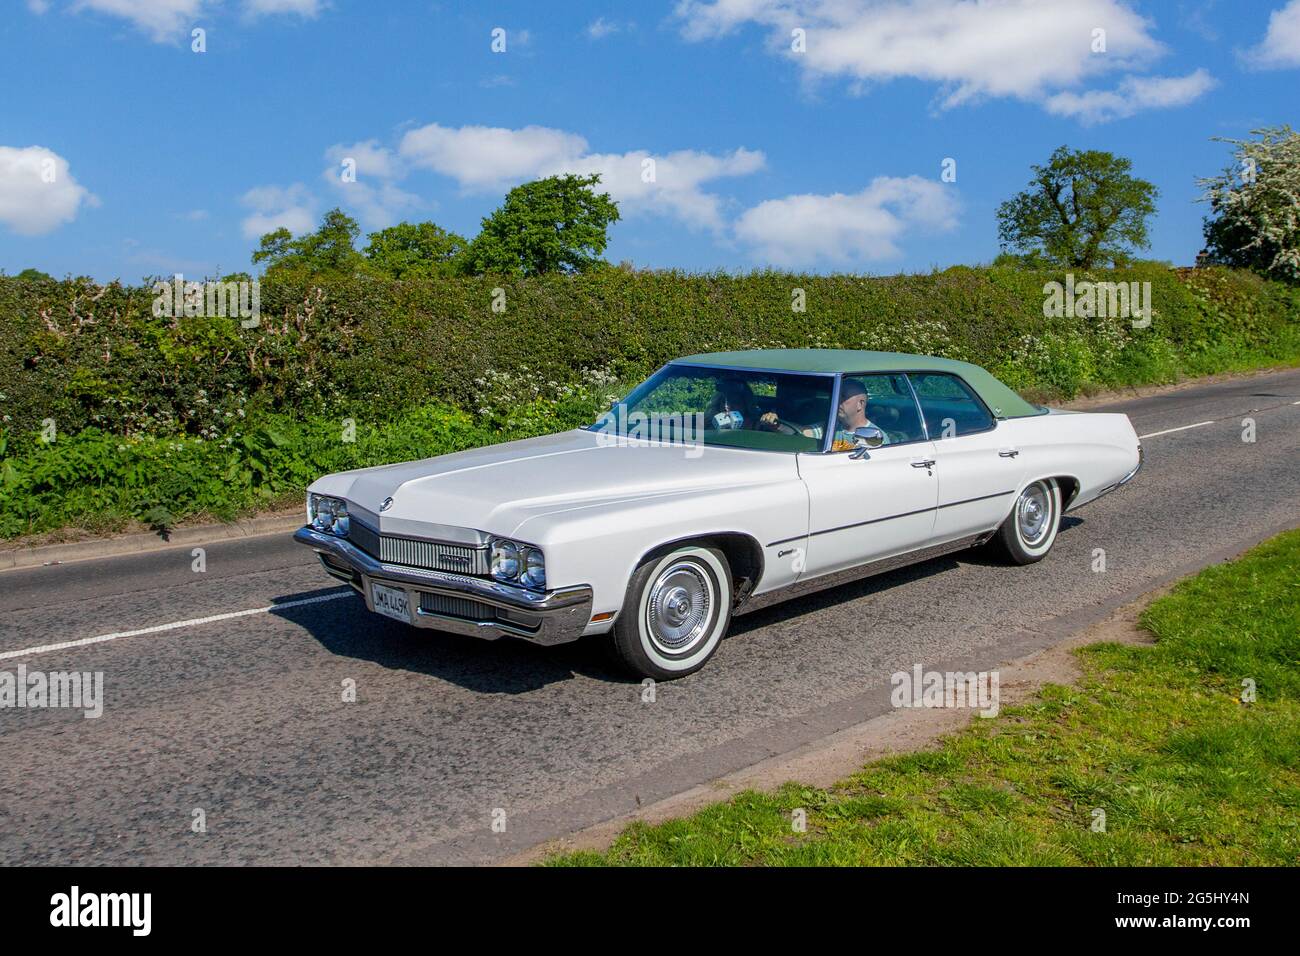 1972 70s Buick Rivera 7500cc American 4dr muscle car, en-route to Capesthorne Hall classic May car show, Cheshire, UK Stock Photo